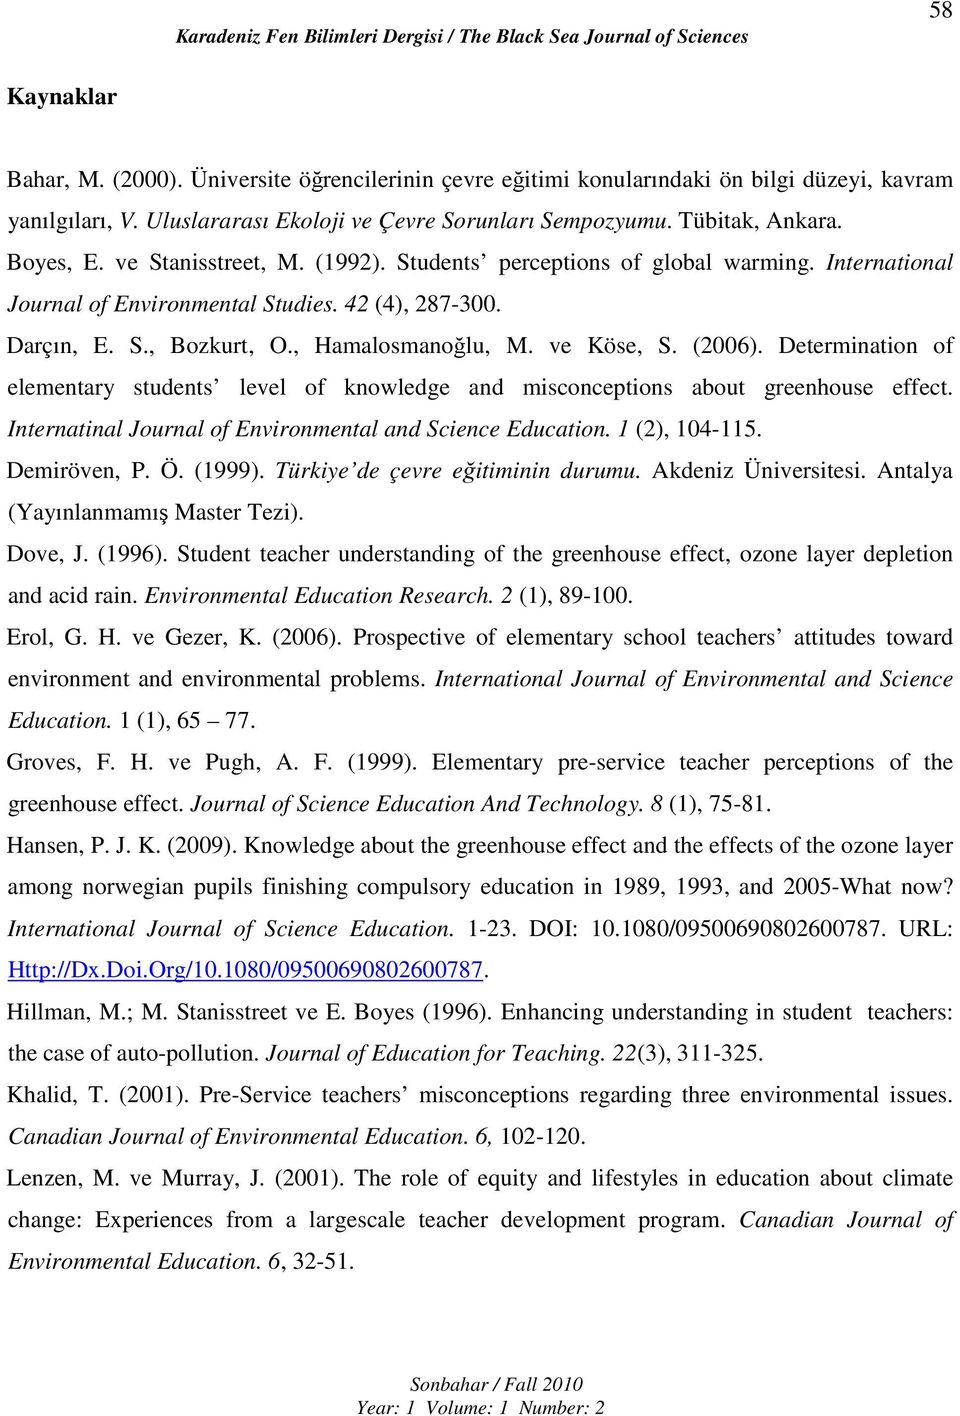 ve Köse, S. (2006). Determination of elementary students level of knowledge and misconceptions about greenhouse effect. Internatinal Journal of Environmental and Science Education. 1 (2), 104-115.